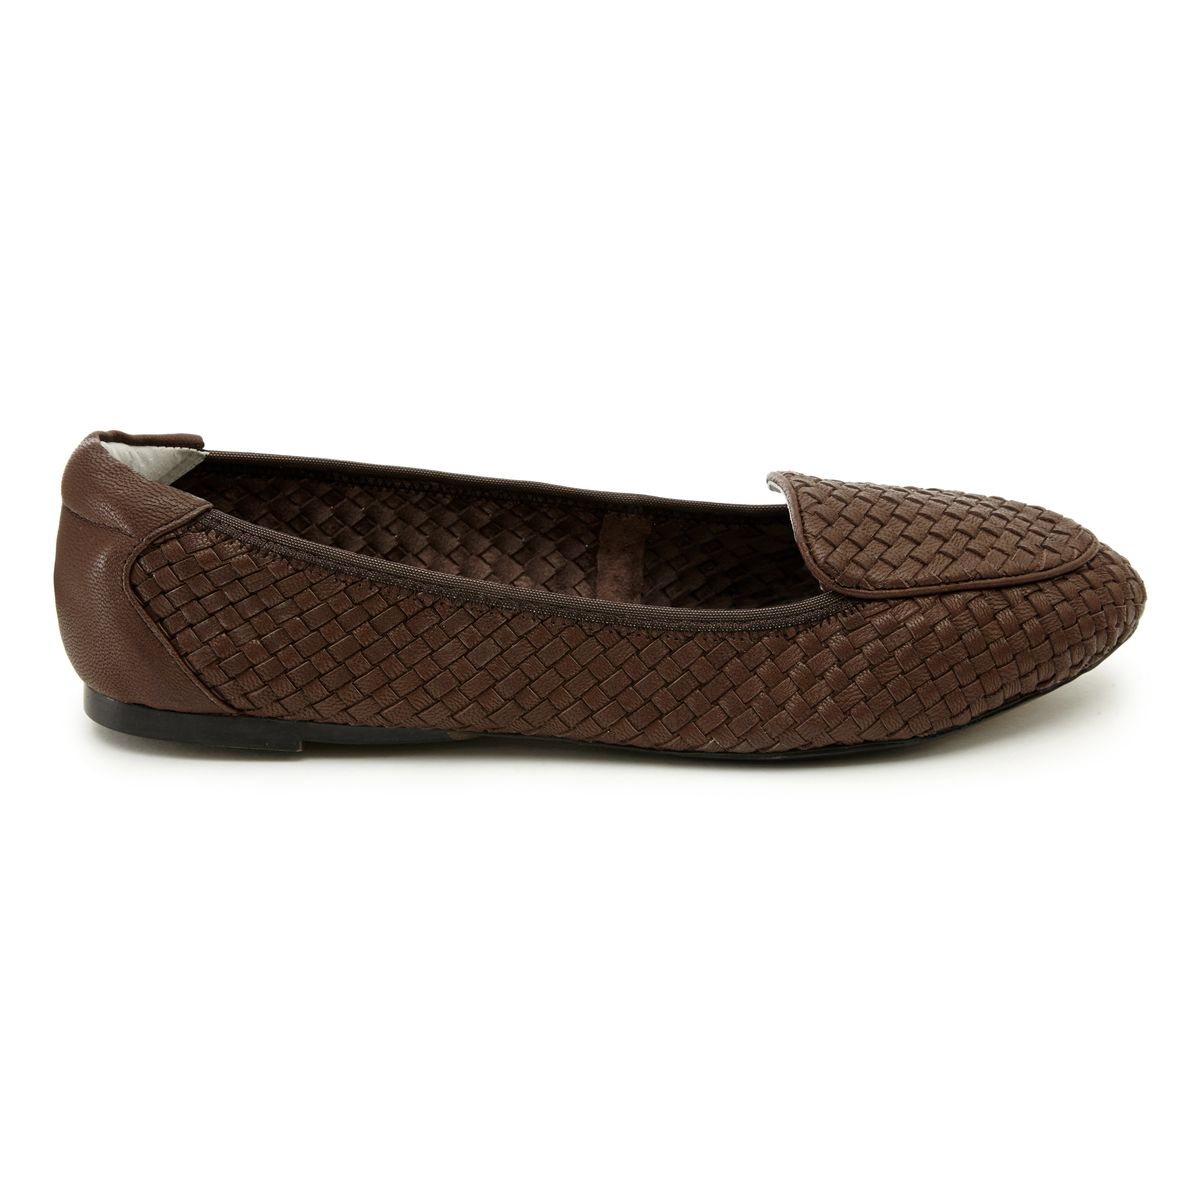 Clapham Brown Leather Loafers from Cocorose London